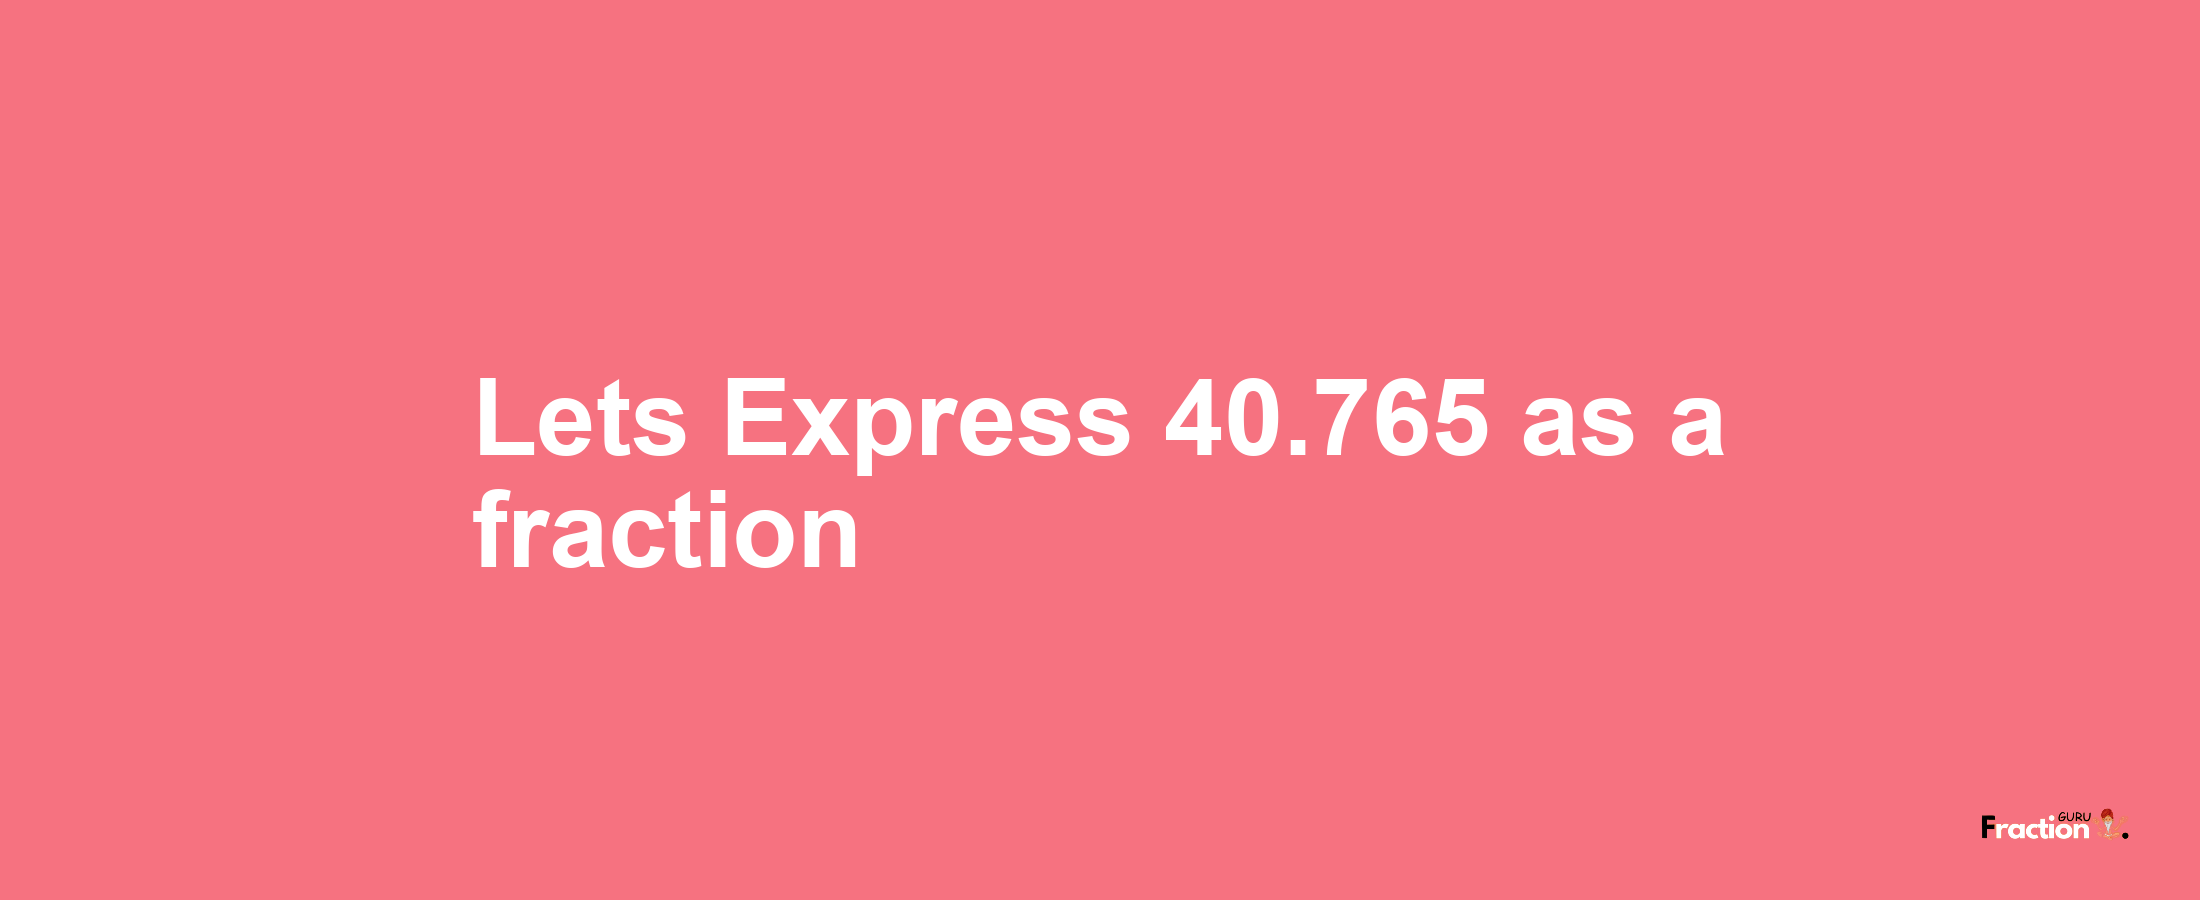 Lets Express 40.765 as afraction